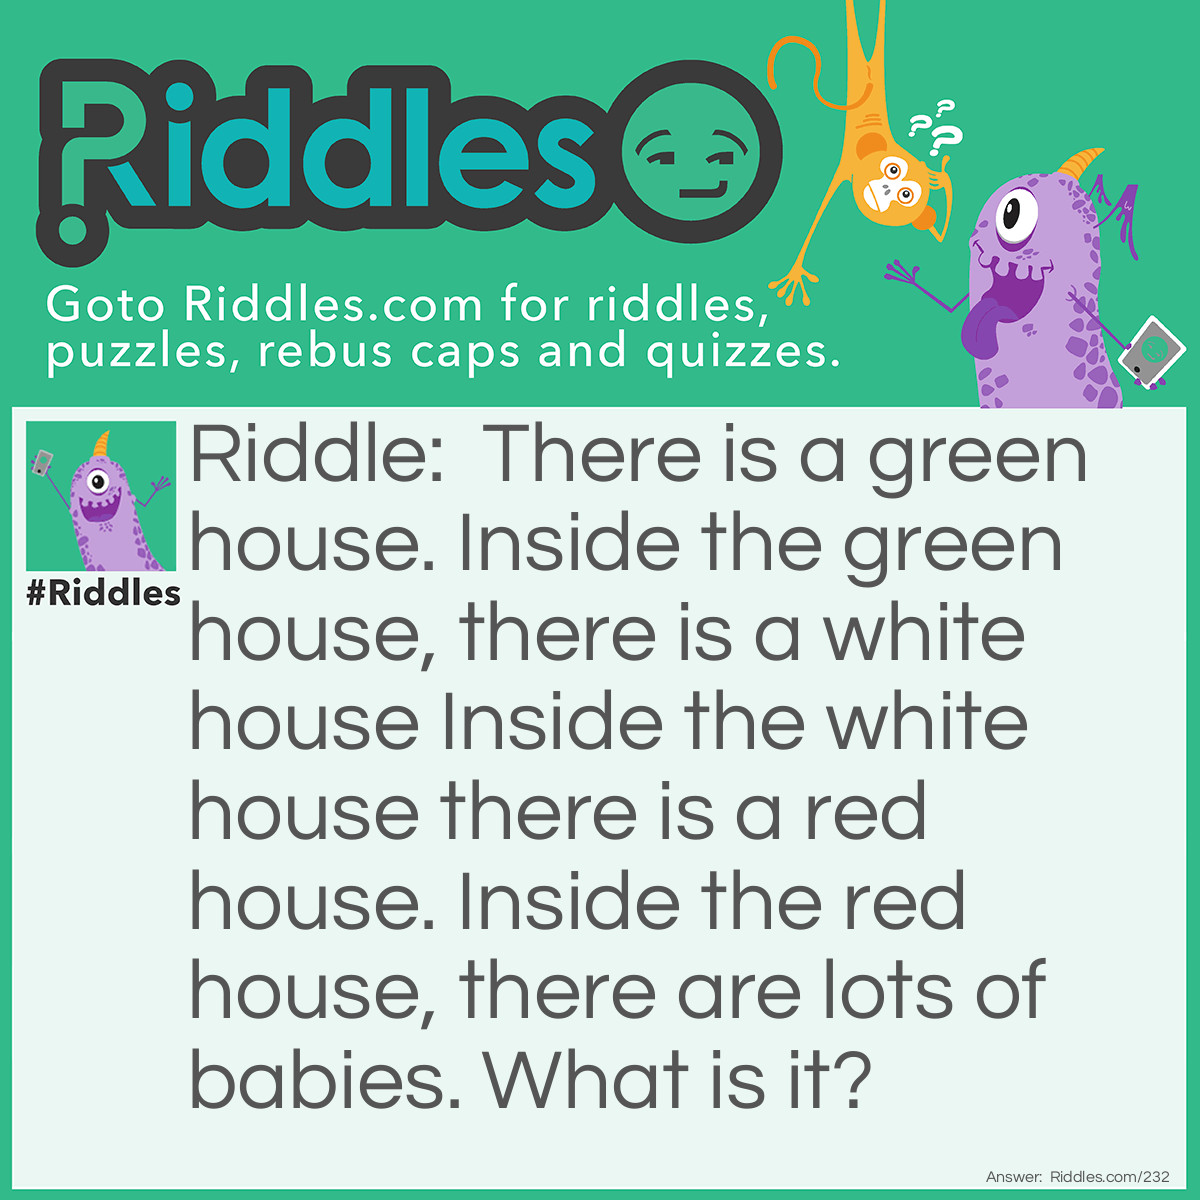 Riddle: There is a green house. Inside the green house, there is a white house Inside the white house there is a red house. Inside the red house, there are lots of babies. What is it? Answer: It is a watermelon.  Explanation: The skin of the watermelon is green (green house), the watermelon rind is white (white house), the watermelon flesh is red (red house), and the watermelon seeds located in the red flesh are the babies.